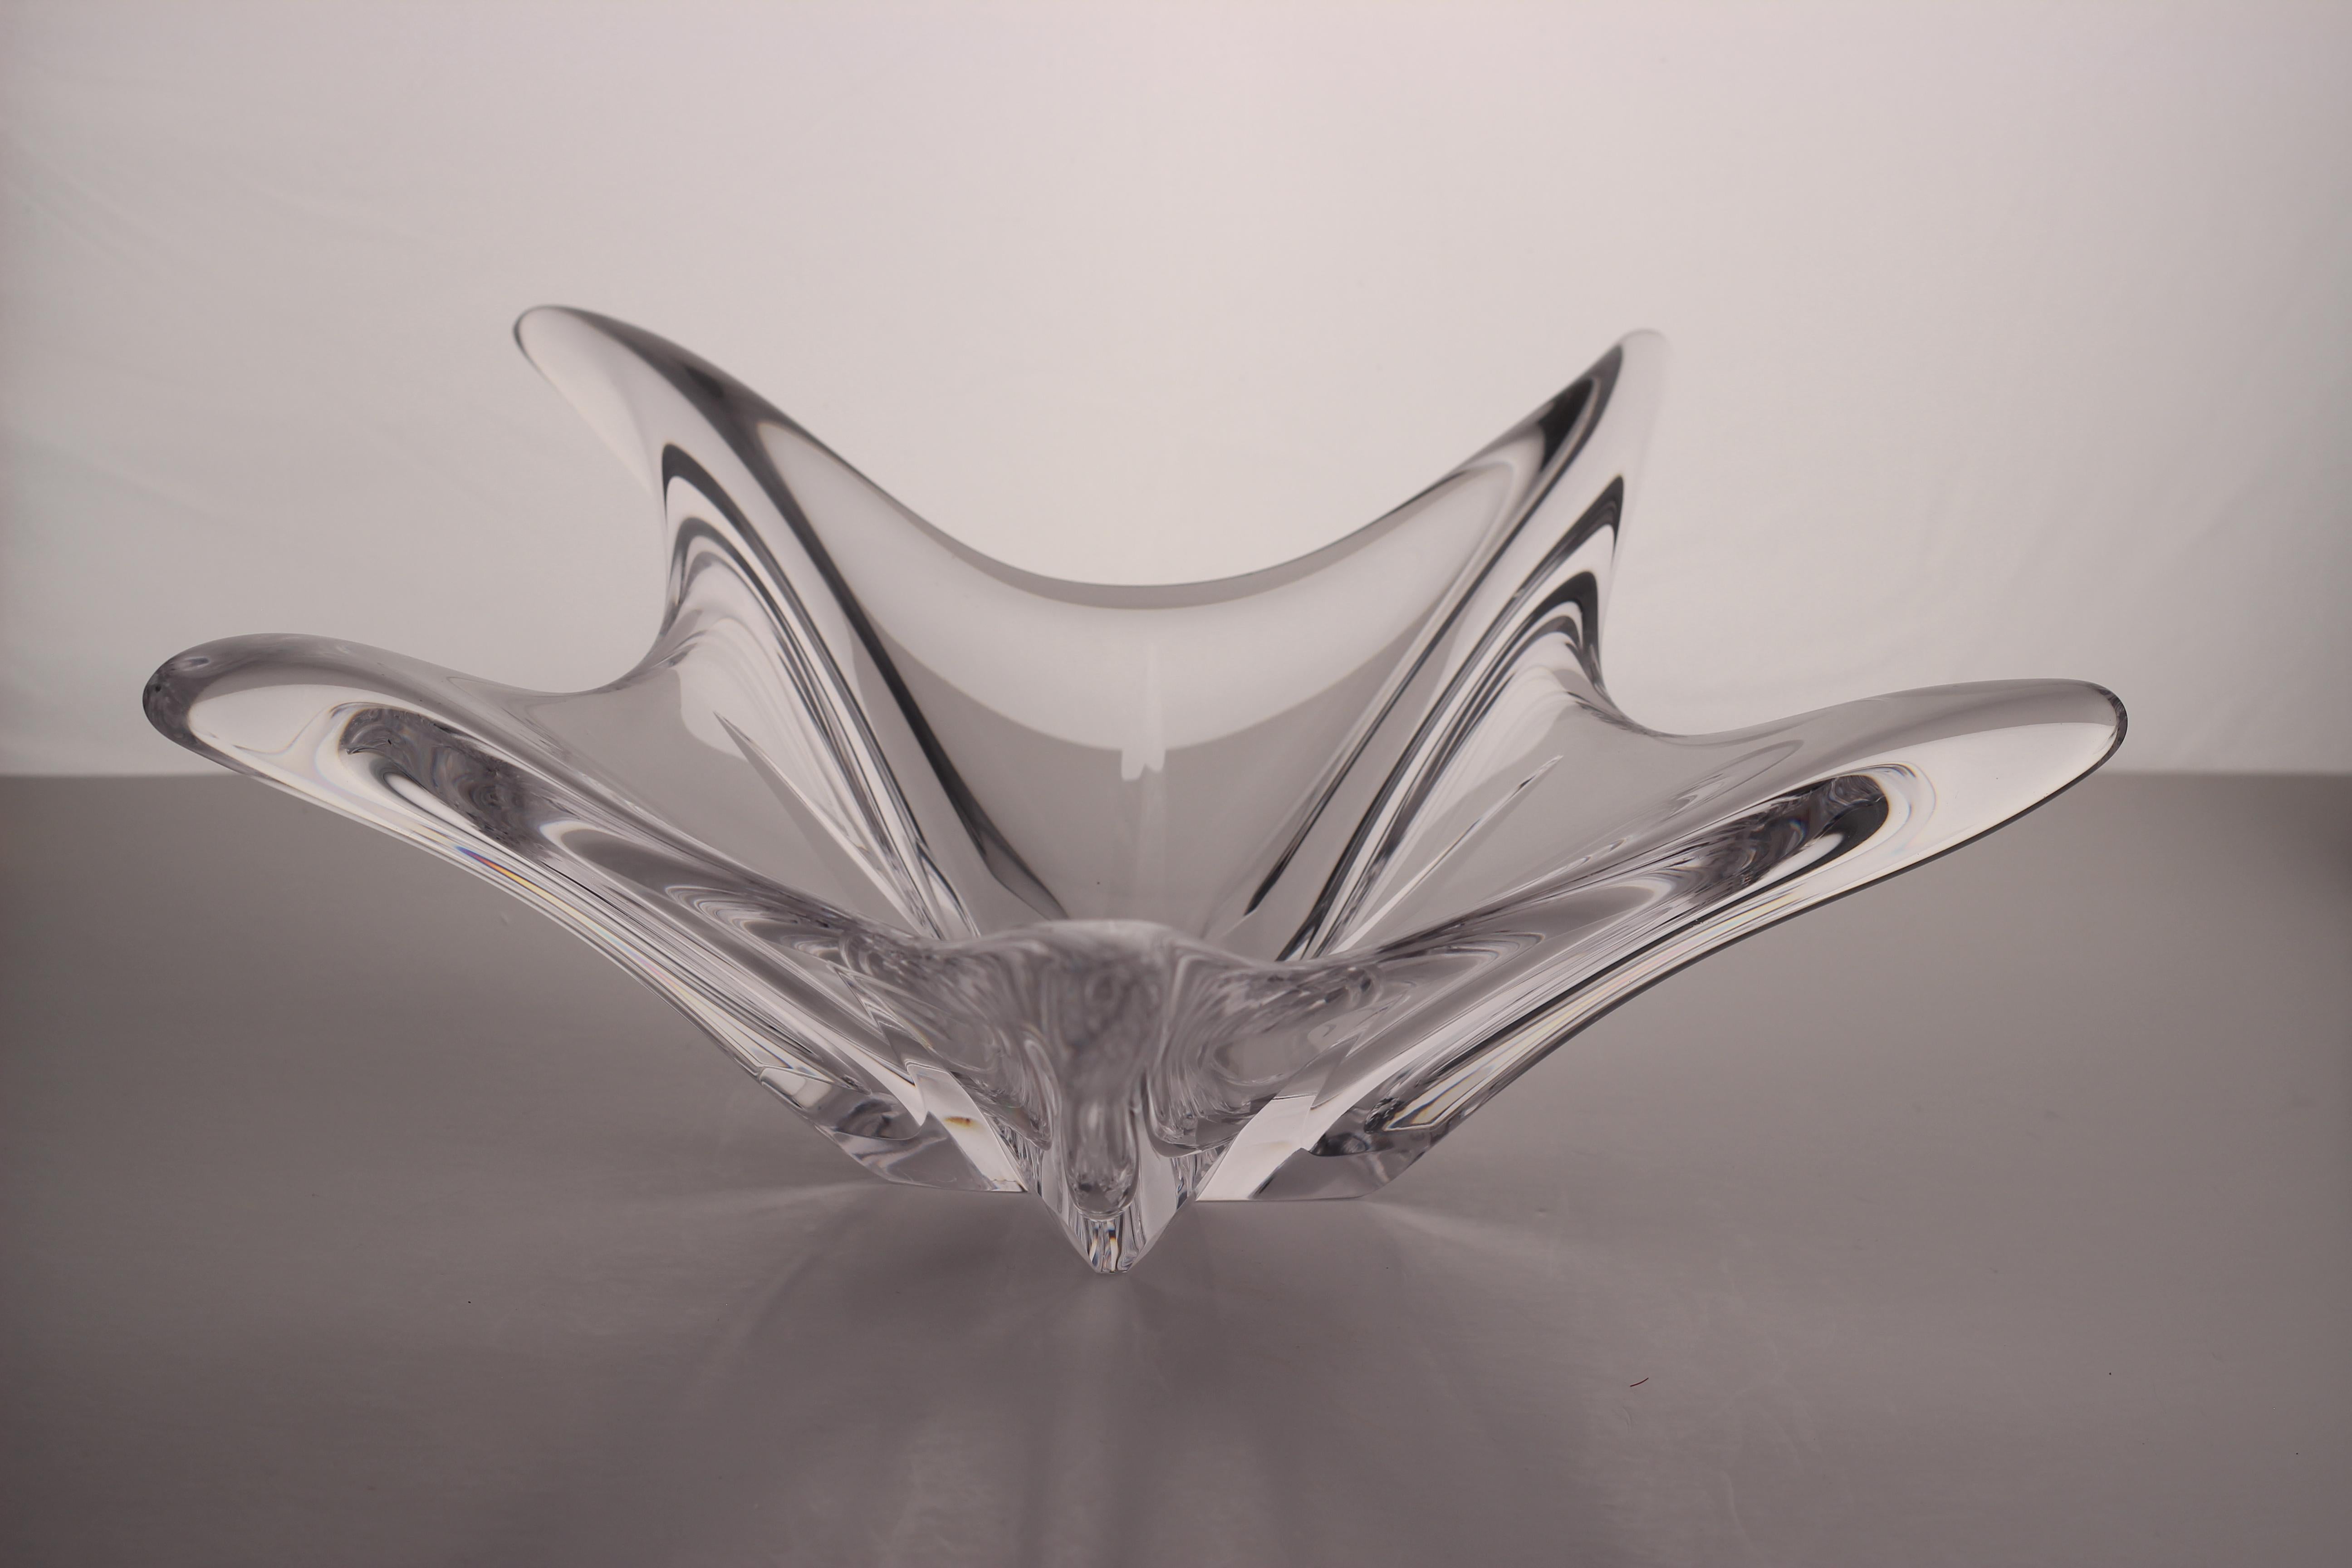 This refined and sculptural translucent glass bowl was produced by Daum, one of the most illustrious glass makers of the period in Nancy, France, circa 1950. Daum was awarded a Grand Prix during the 1900, Universal Exhibition for their exquisite